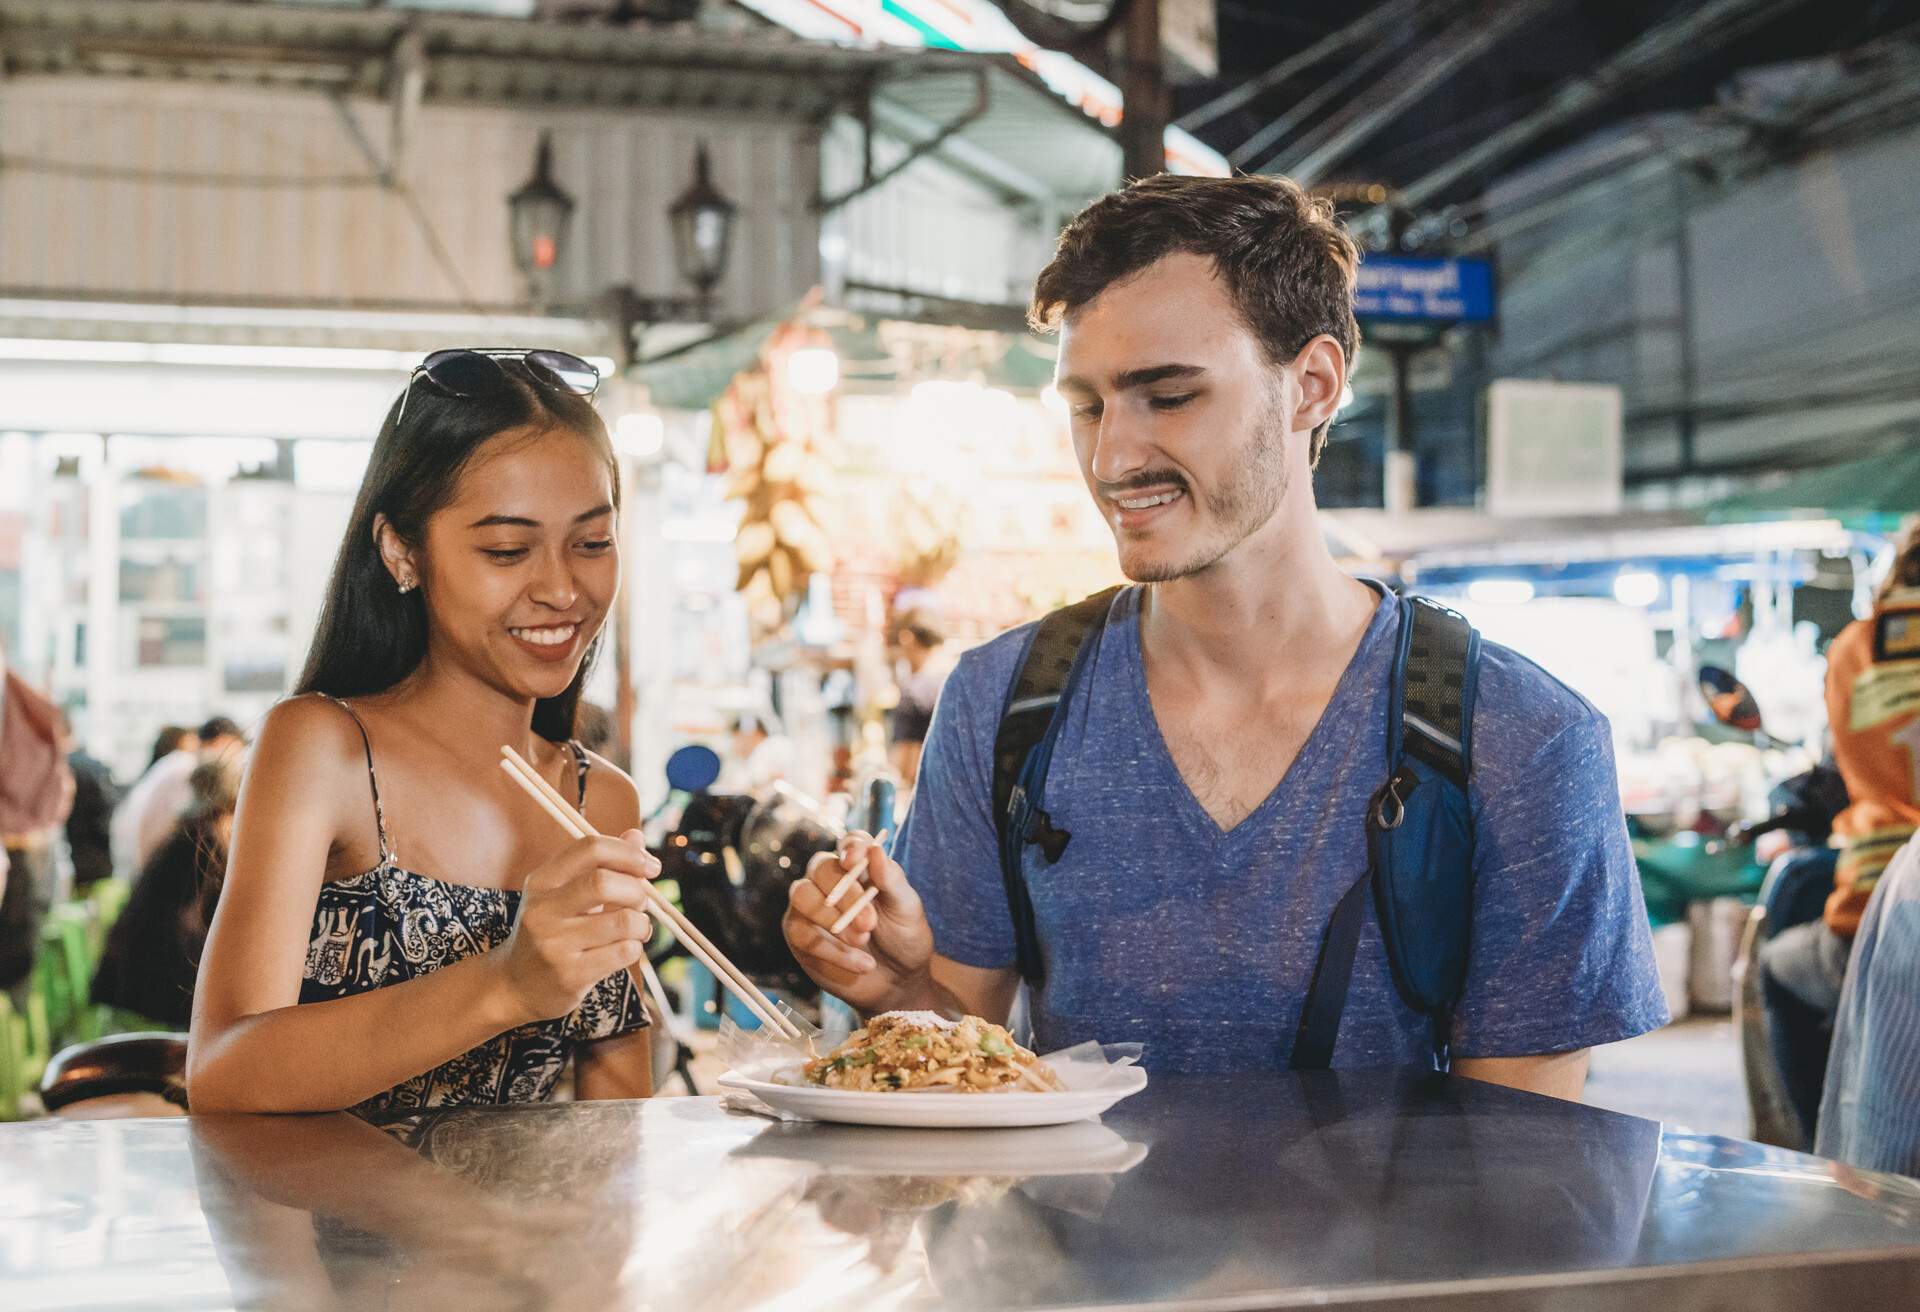 dest_thailand_bangkok_theme_people_couple_night-market_gettyimages-1132933215_universal_within-usage-period_86544